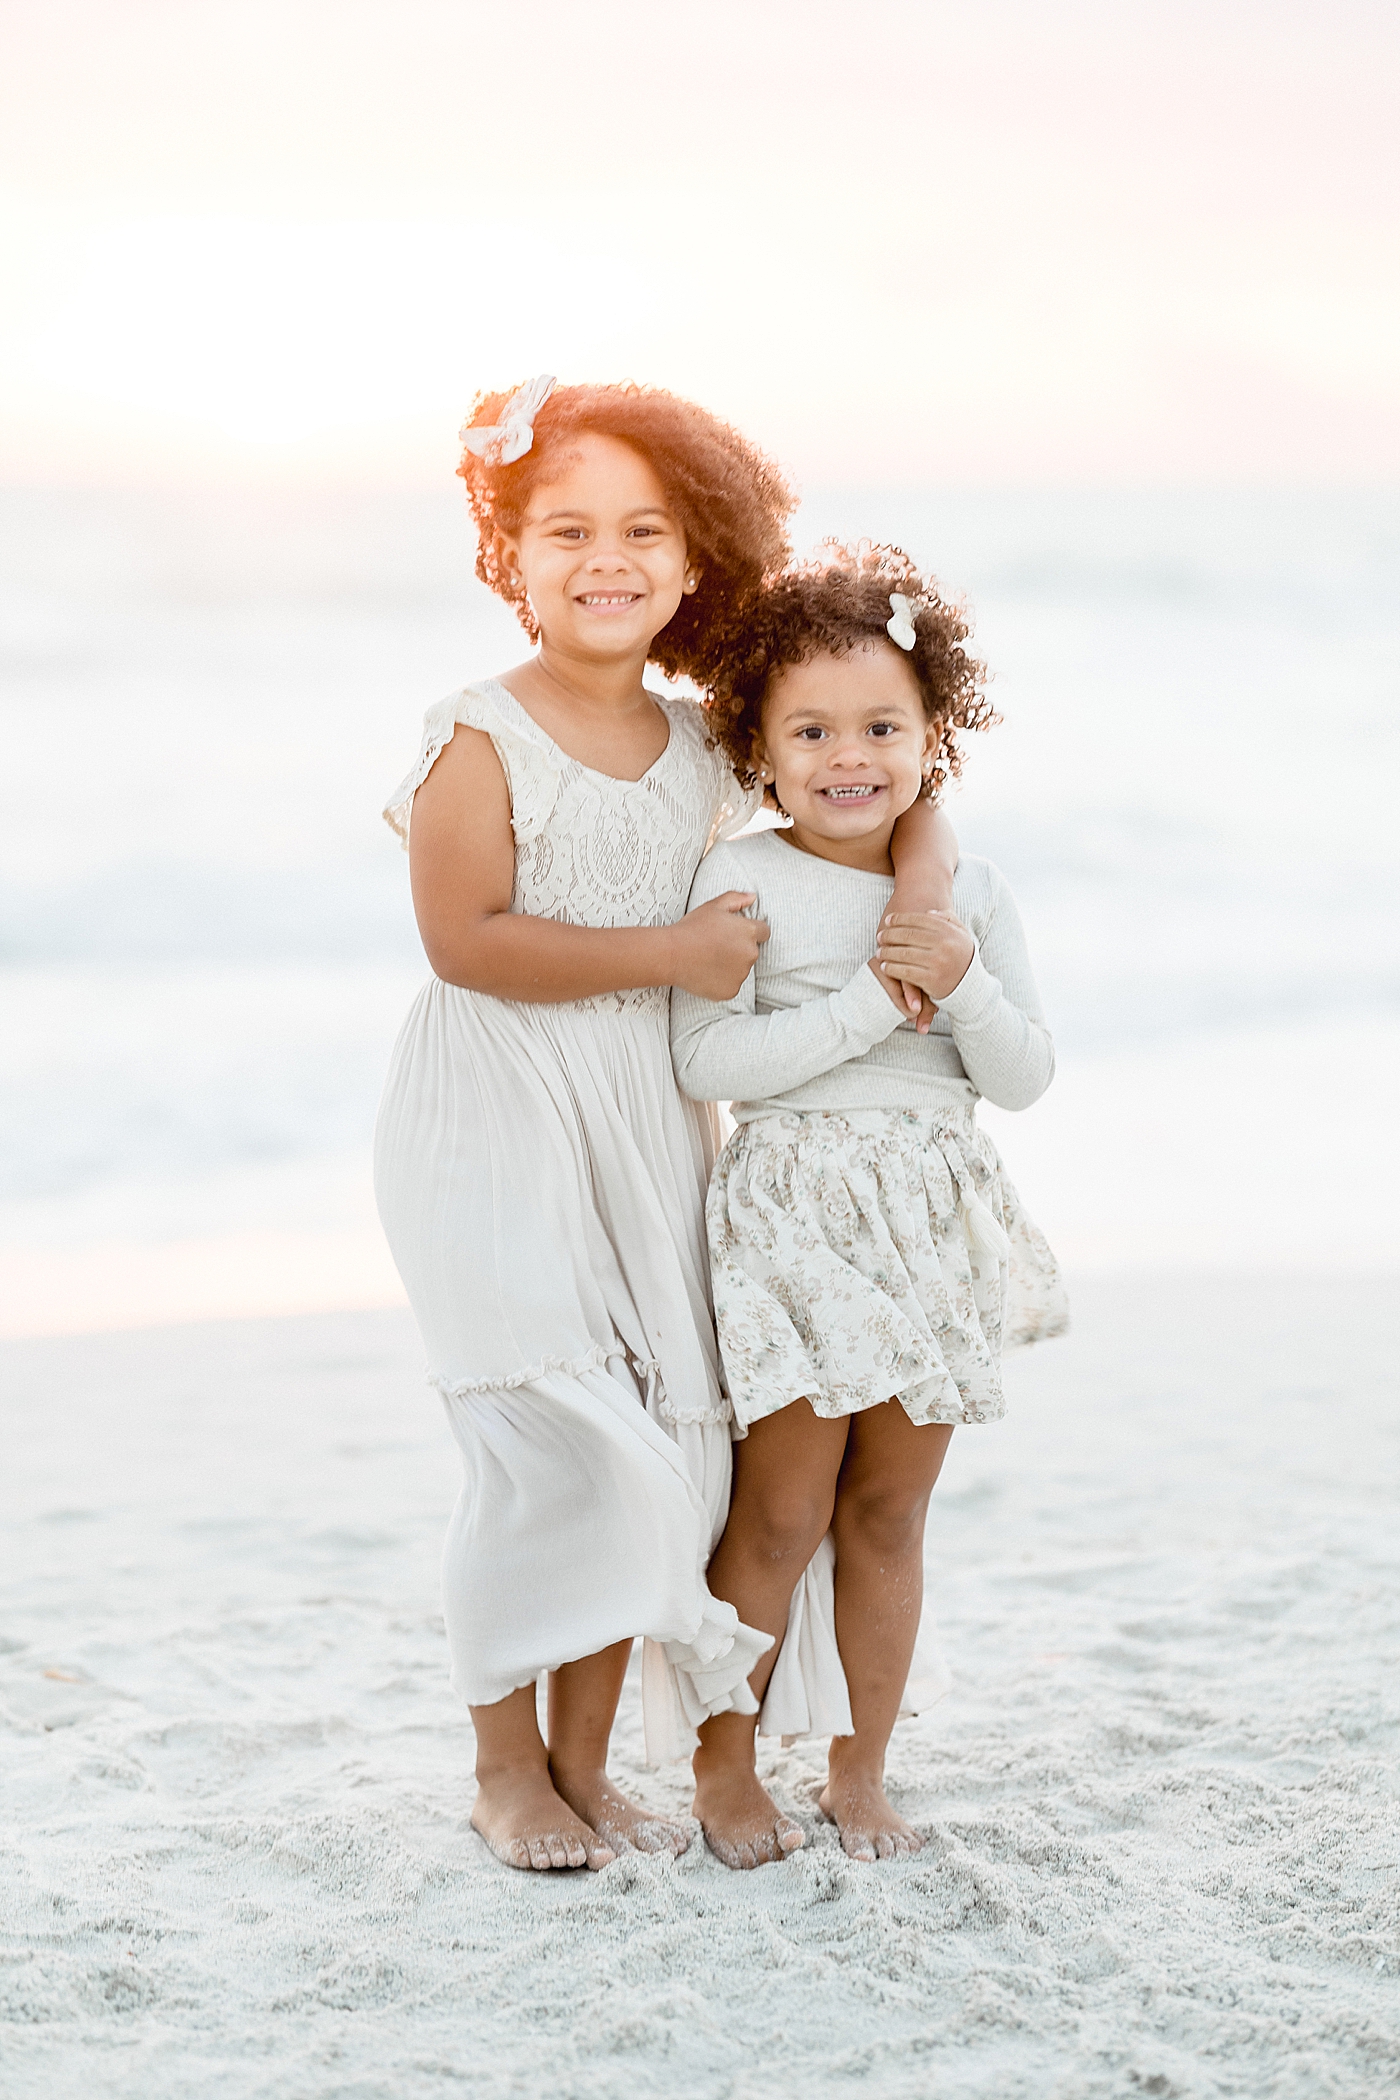 Sisters standing together with arms around each other on the beach. Photo by Brittany Elise Photography.